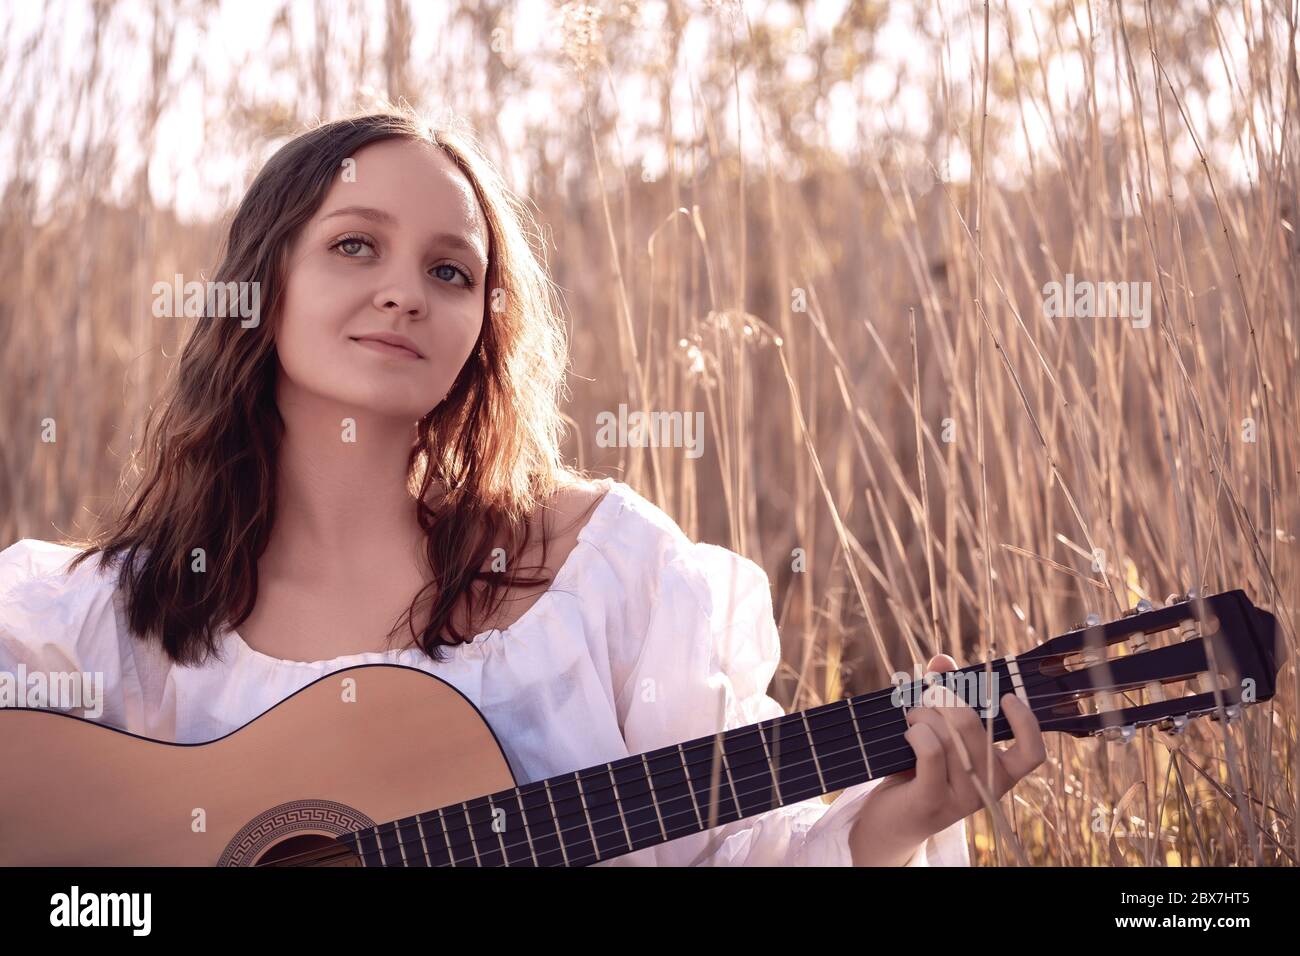 Young beautiful woman with long hair musician playing acoustic guitar at sunset field. Stock Photo